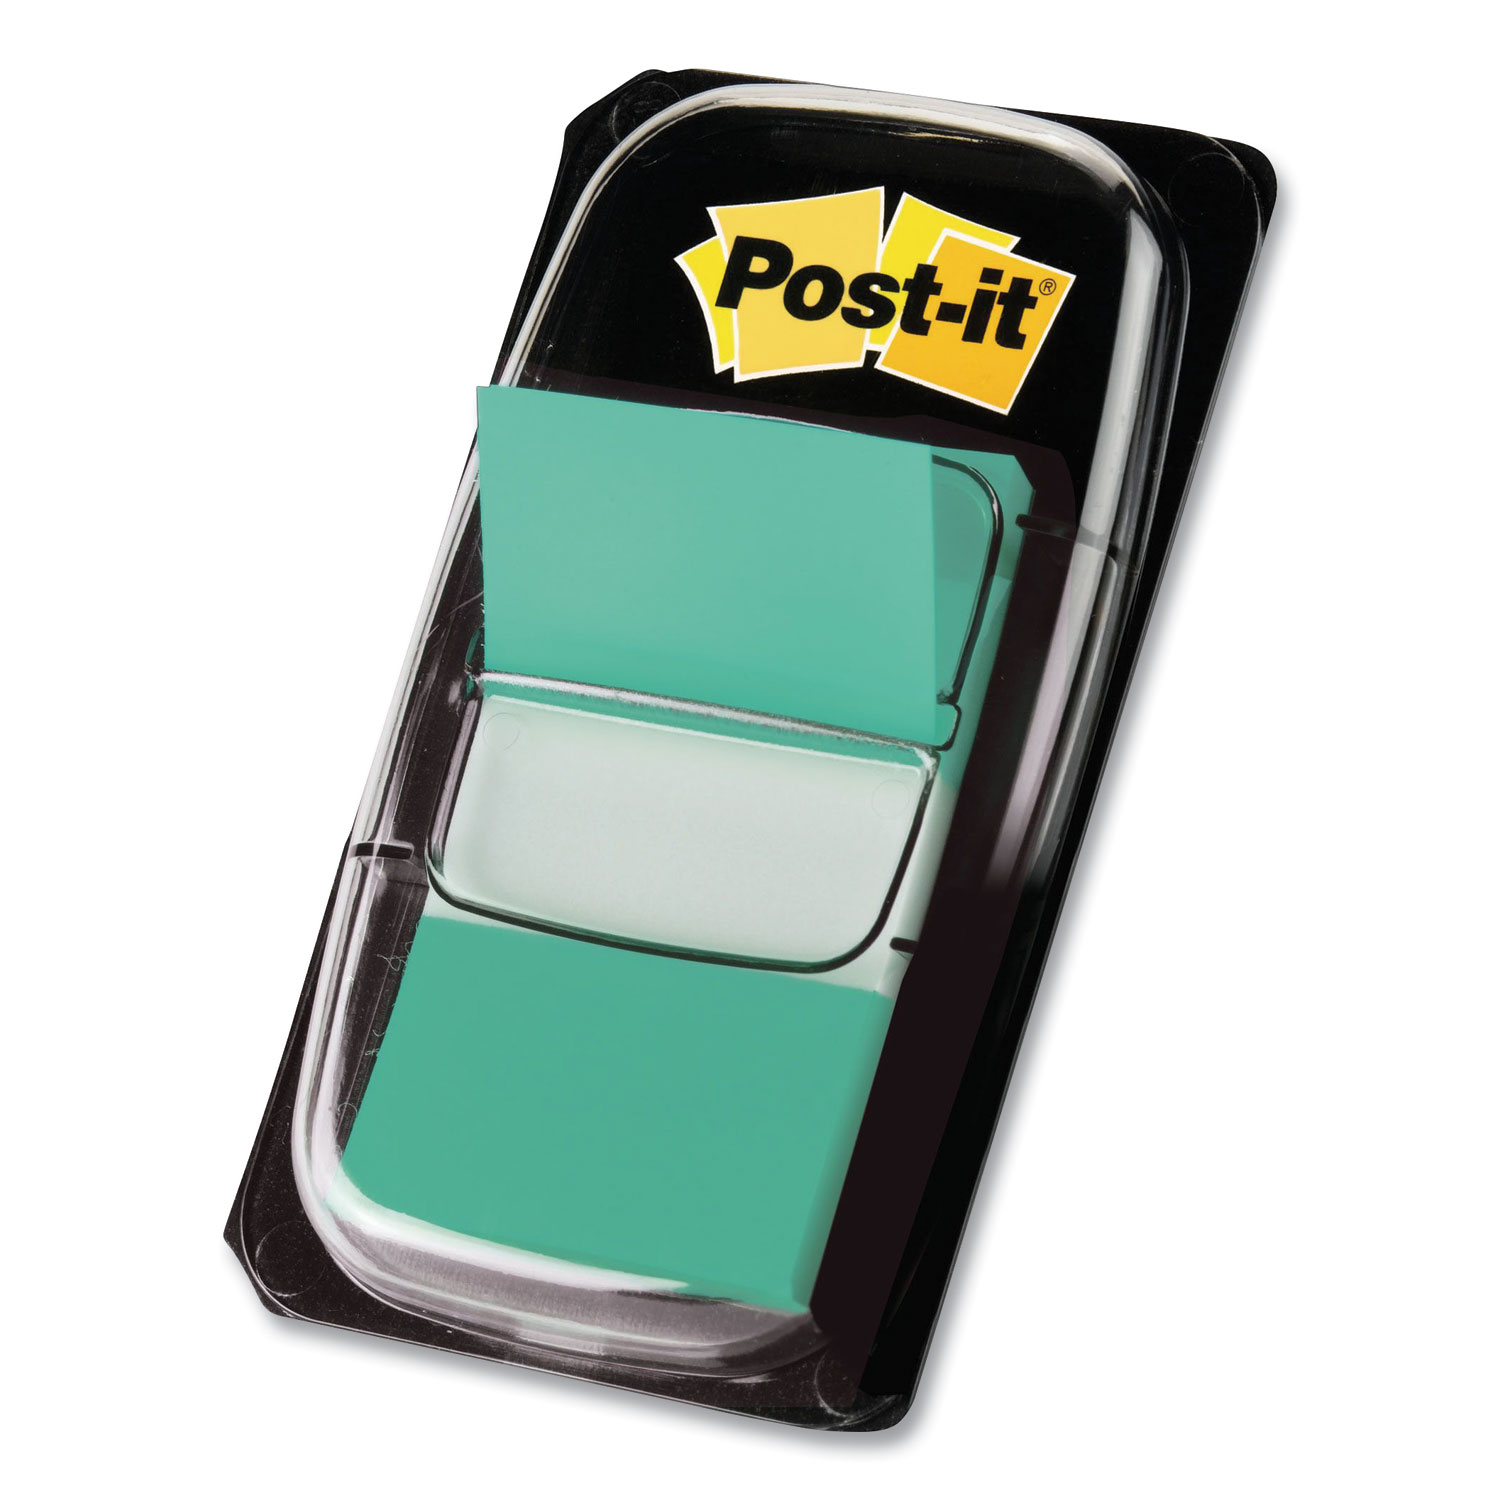  Post-it 680324 1 Flags Value Pack, Green, 50 Flags/Dispenser, 24 Dispensers/Pack (MMM689375) 